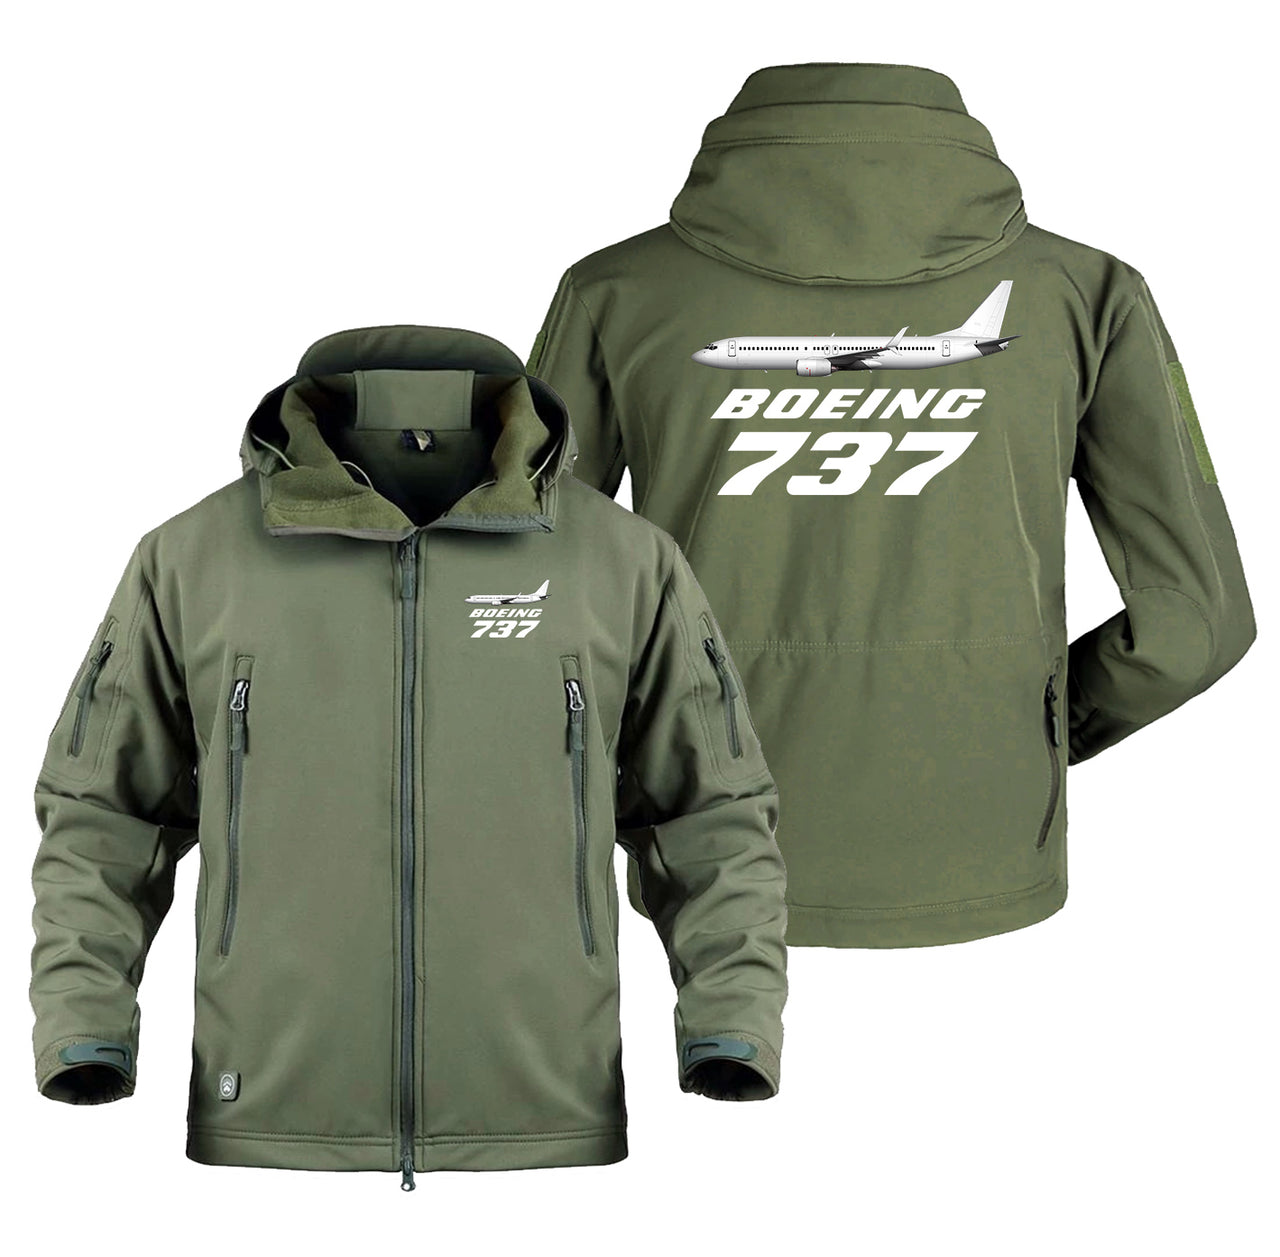 The Boeing 737 Designed Military Jackets (Customizable)